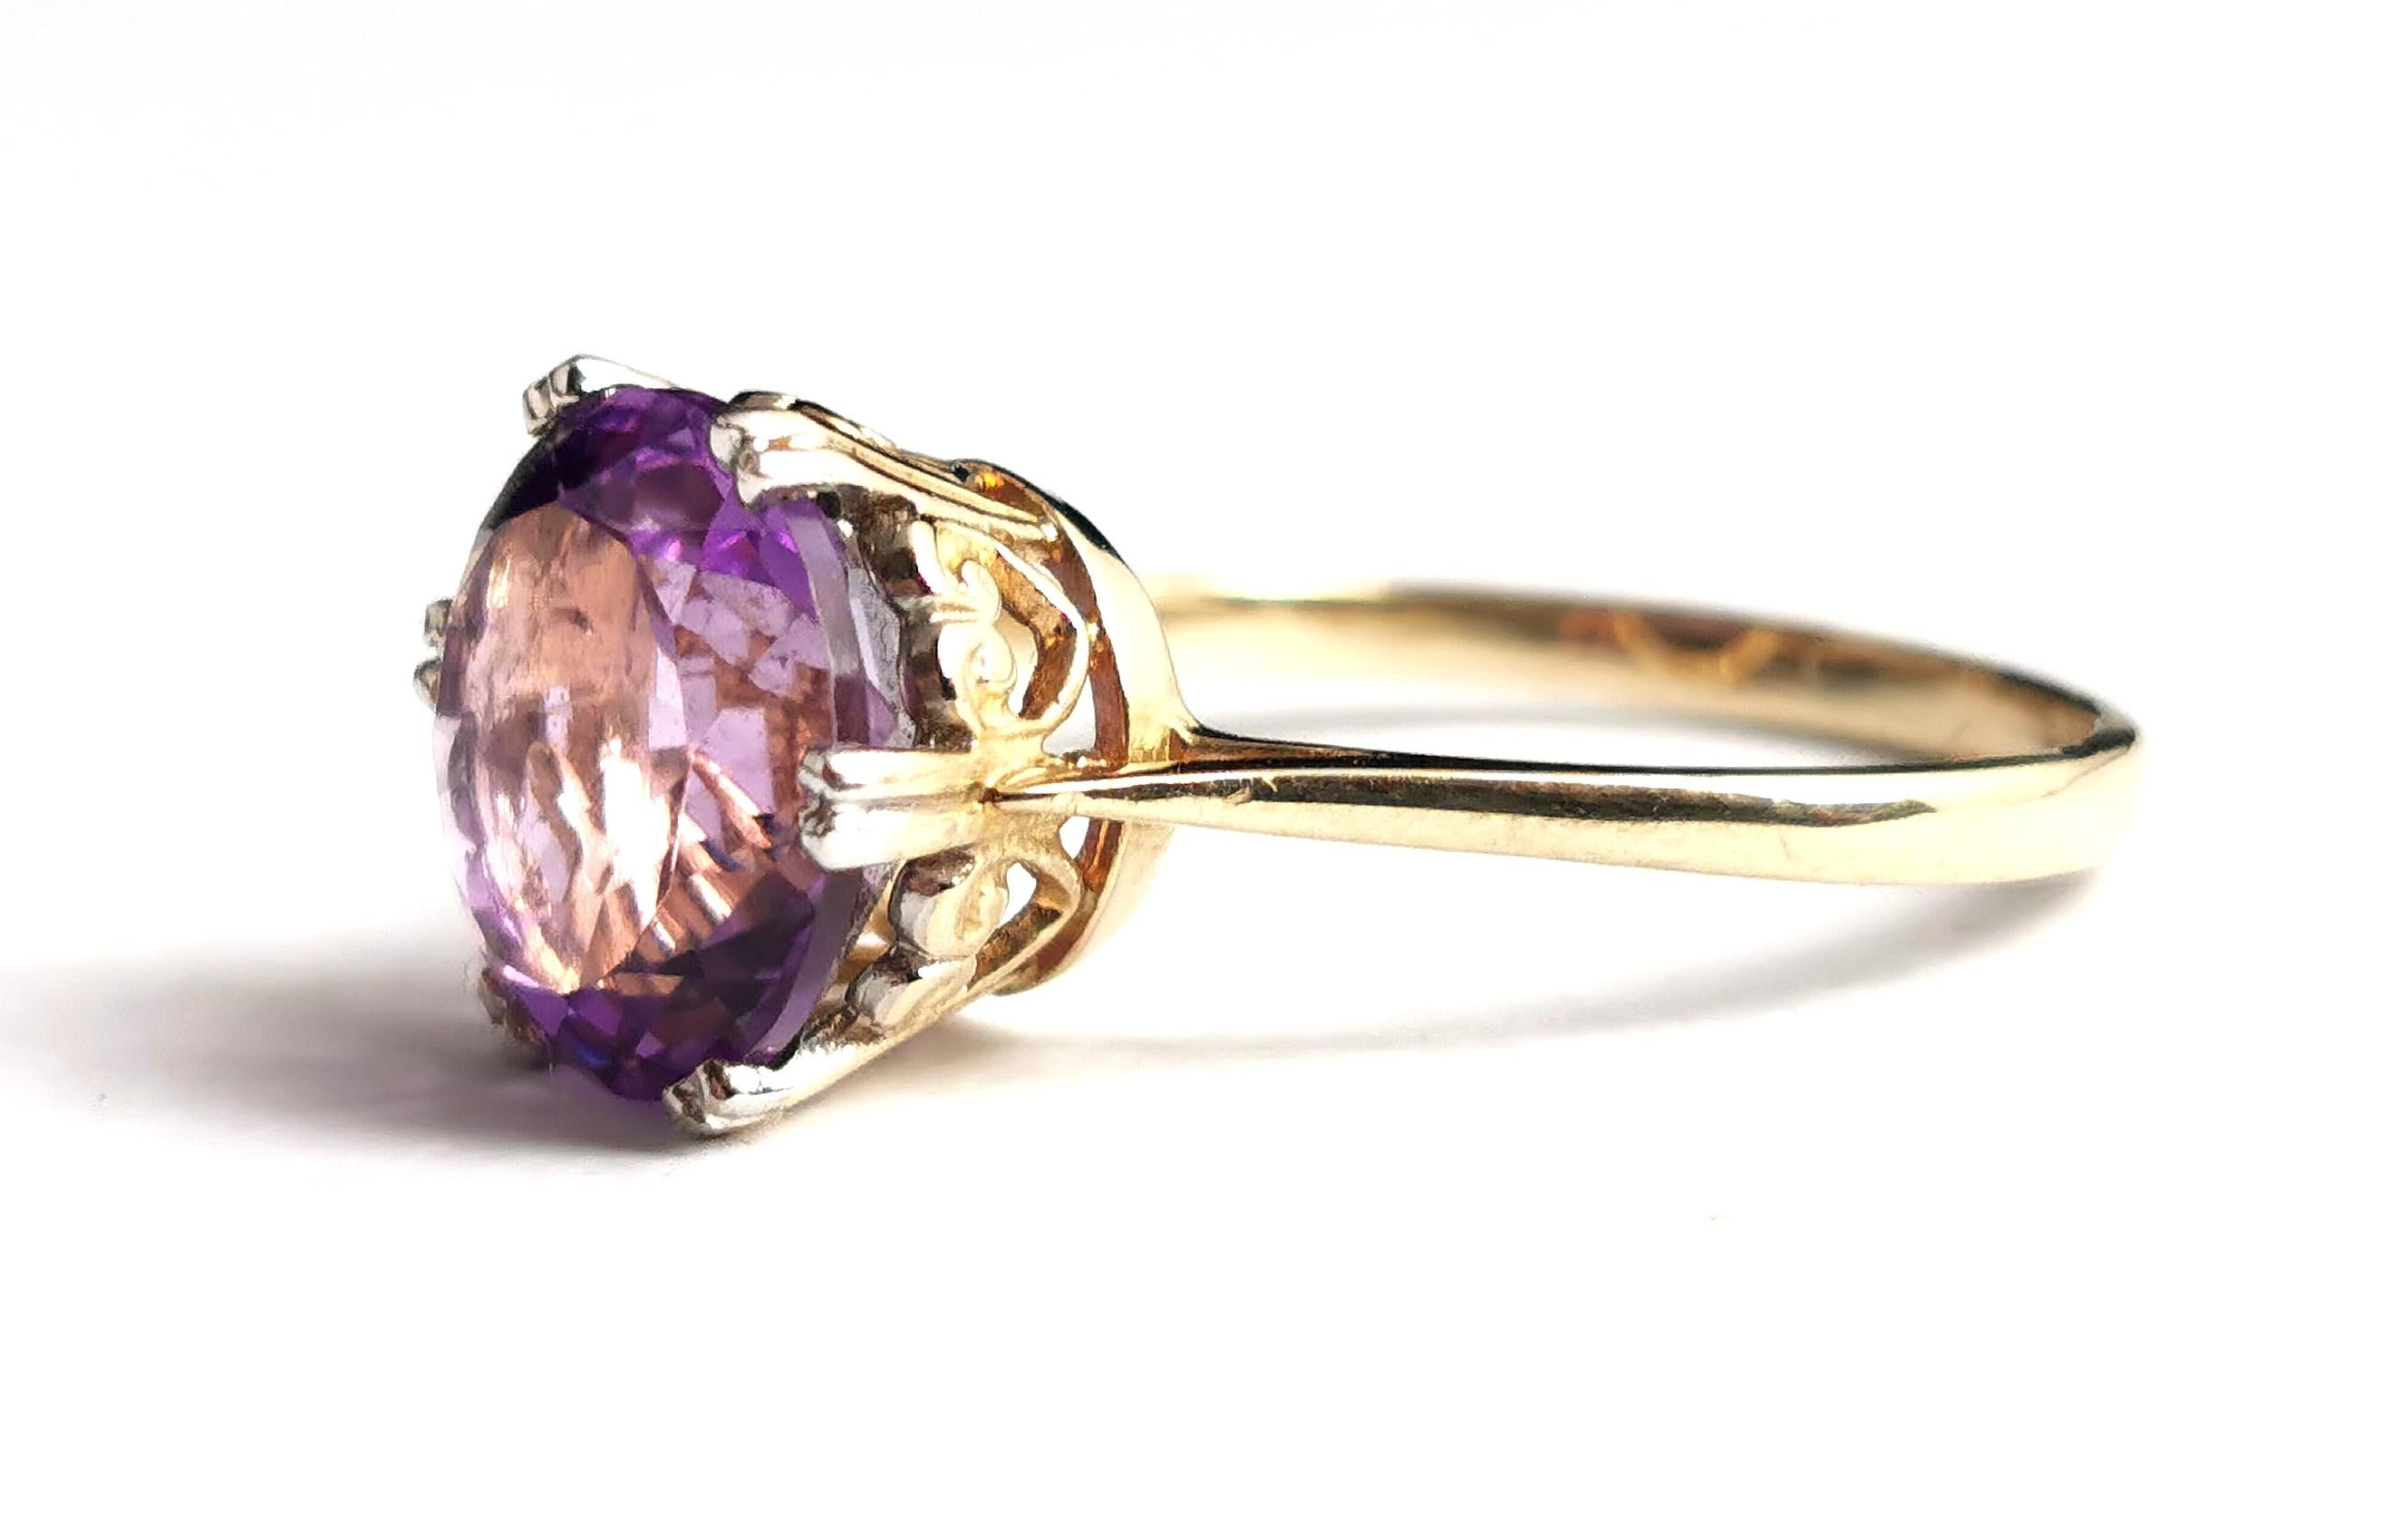 Vintage Amethyst Cocktail Ring, 9k Yellow Gold 6